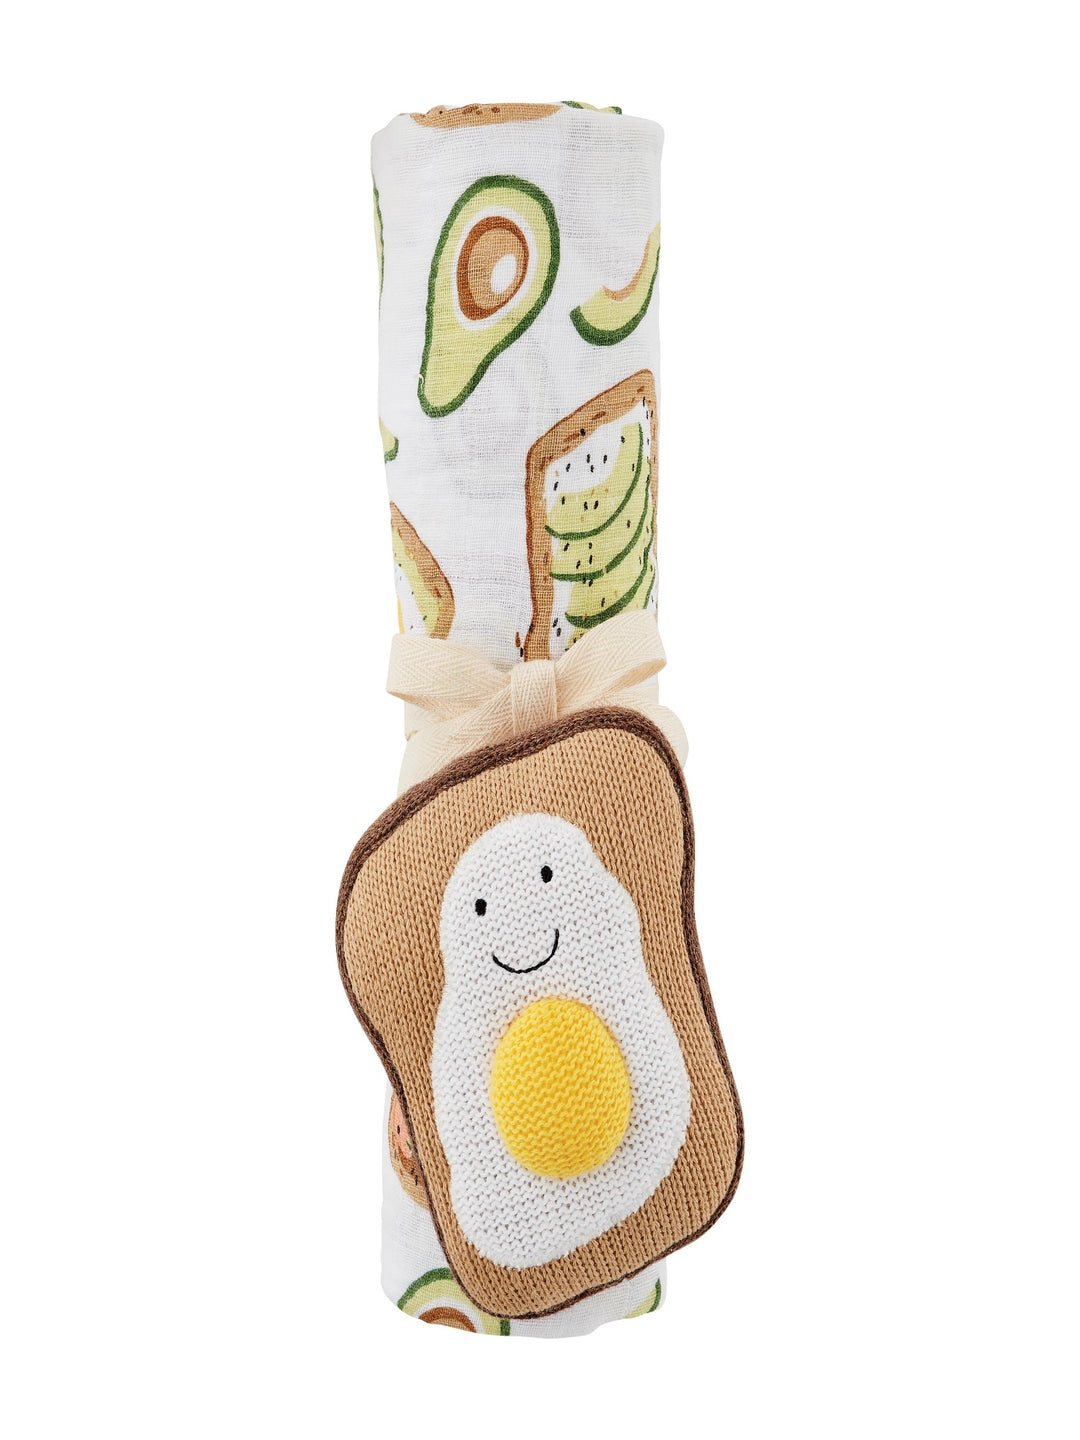 Rattle and Swaddle Set, Avocado and Toast